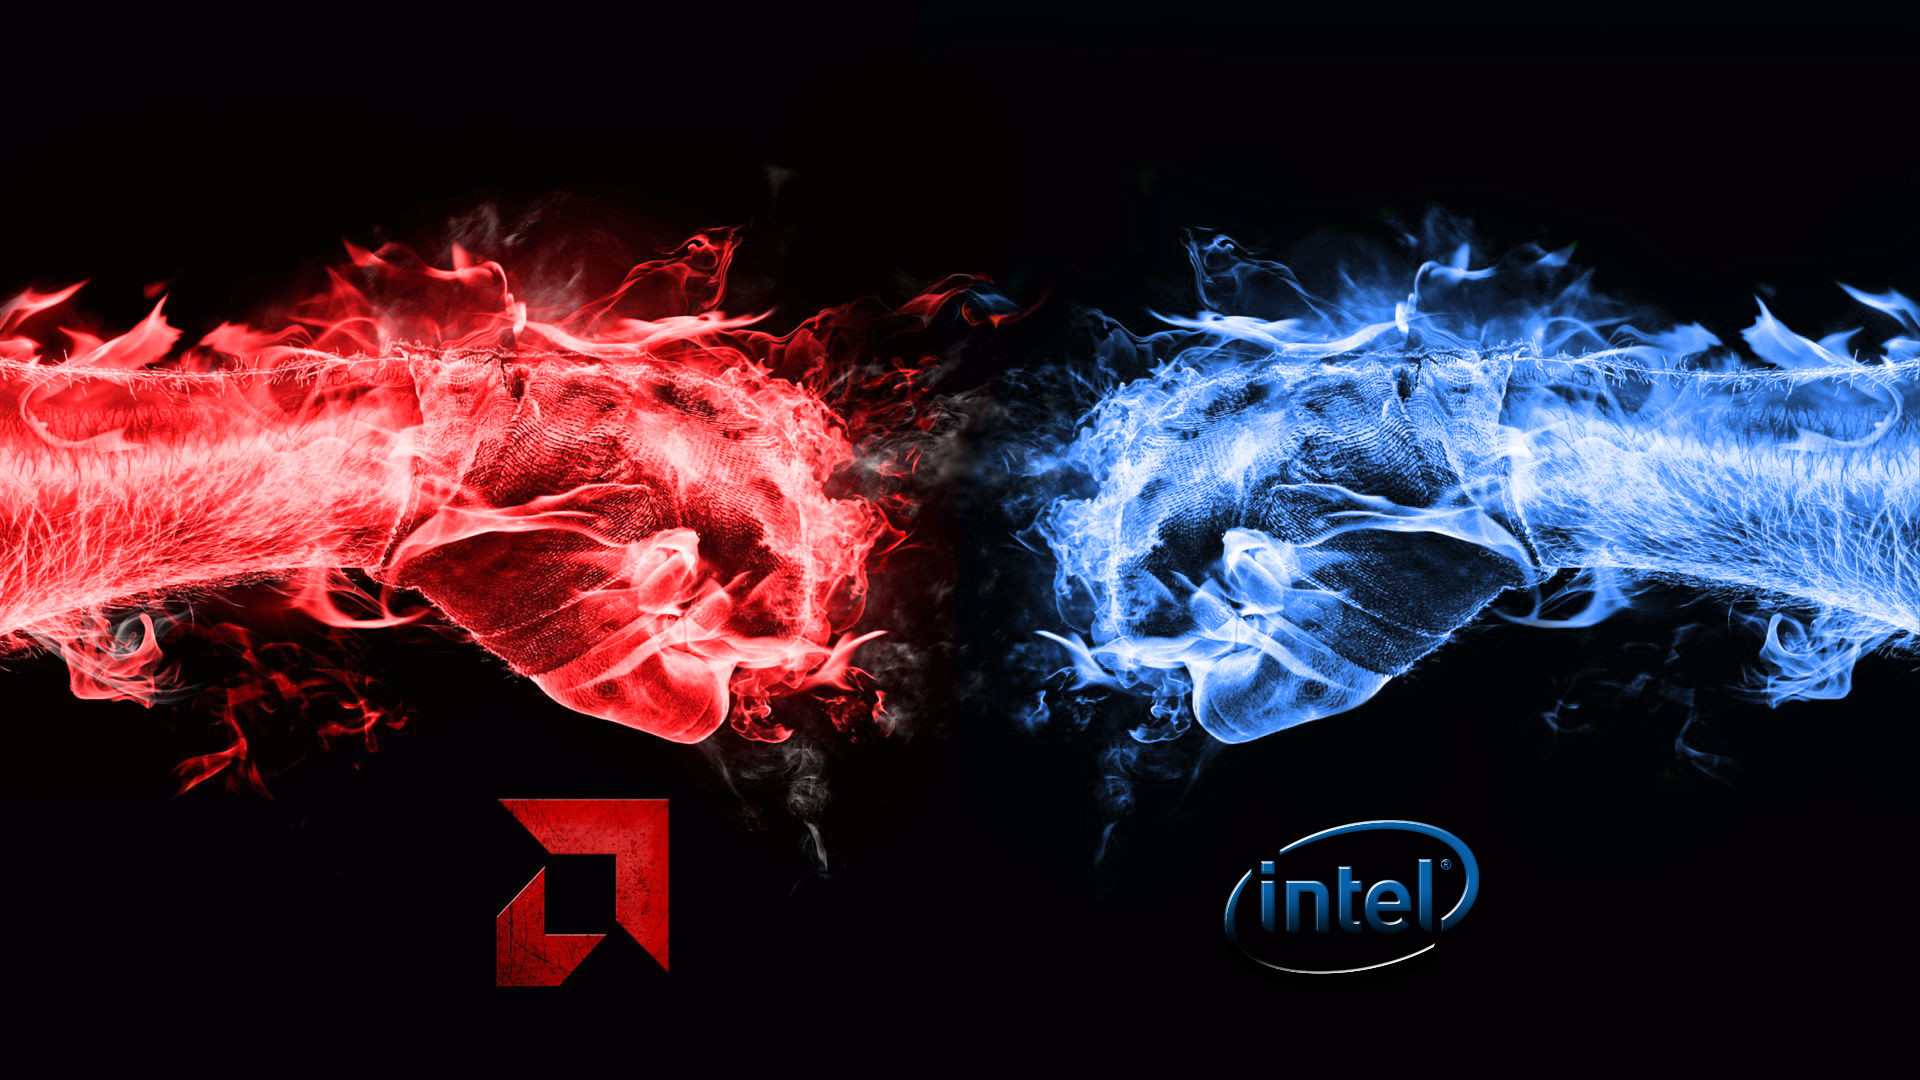 1920x1080 AMD's Upcoming Ryzen Launch to Prompt Reshuffle of Intel's CPU Line-up